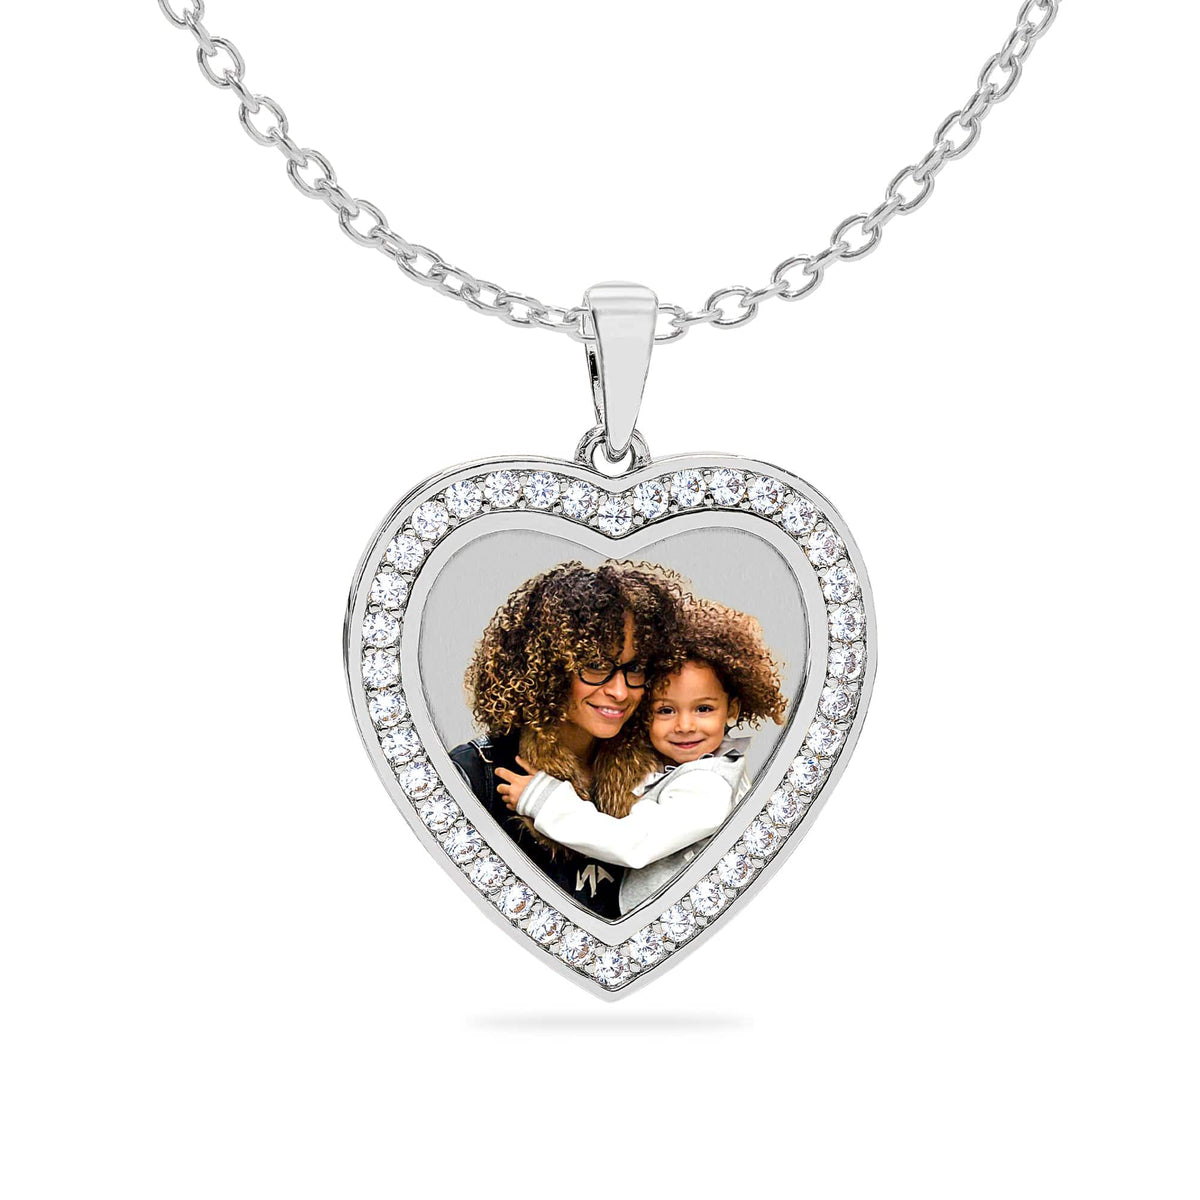 Silver Plated / Link Chain Heart Shaped Photo Pendant with Stones